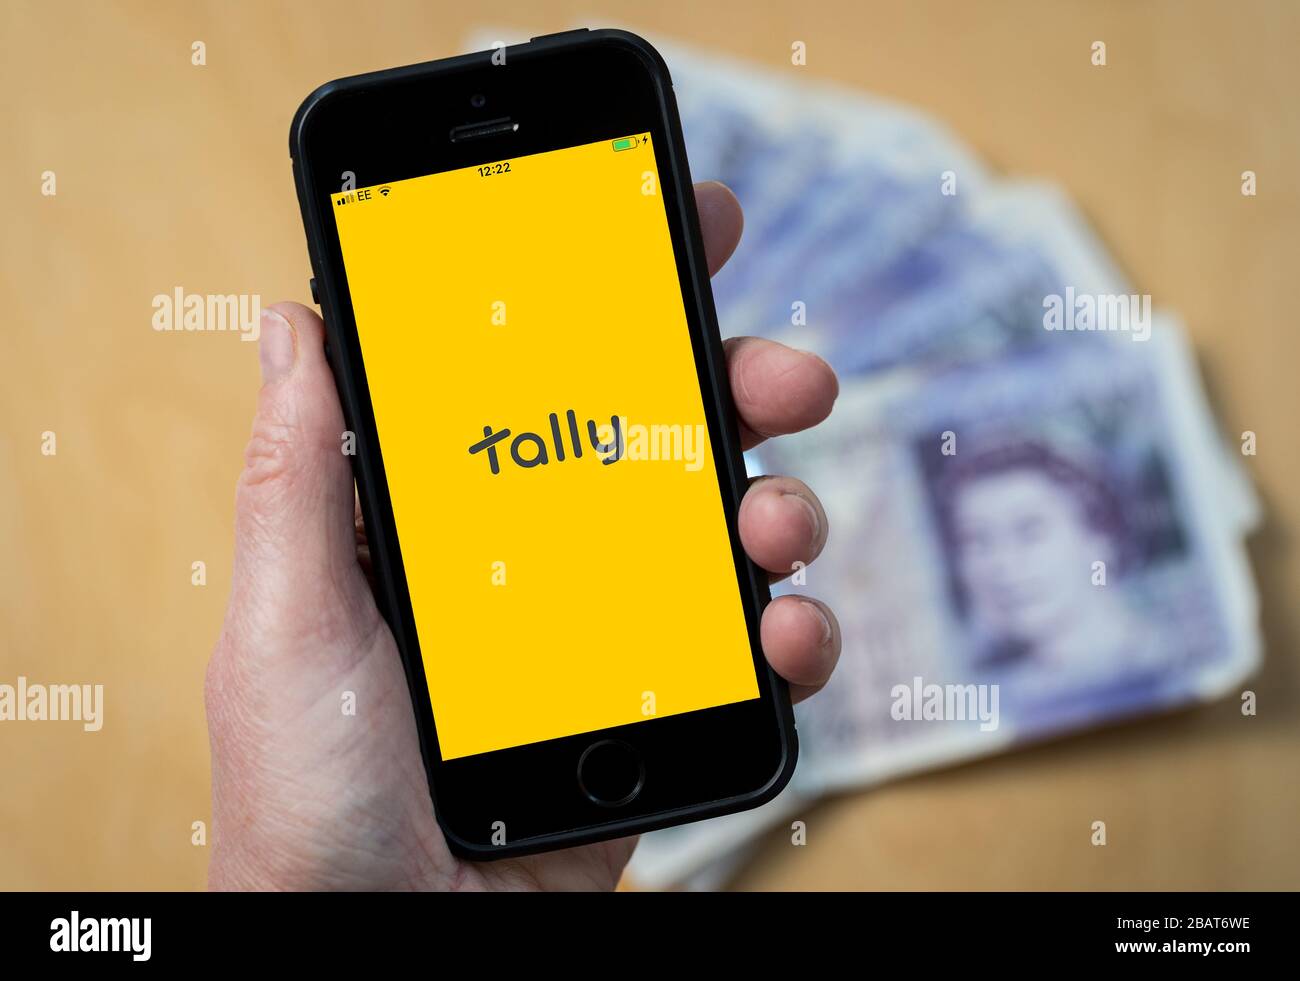 A woman using the Tally accounting app on a mobile phone. (Editorial Use Only) Stock Photo